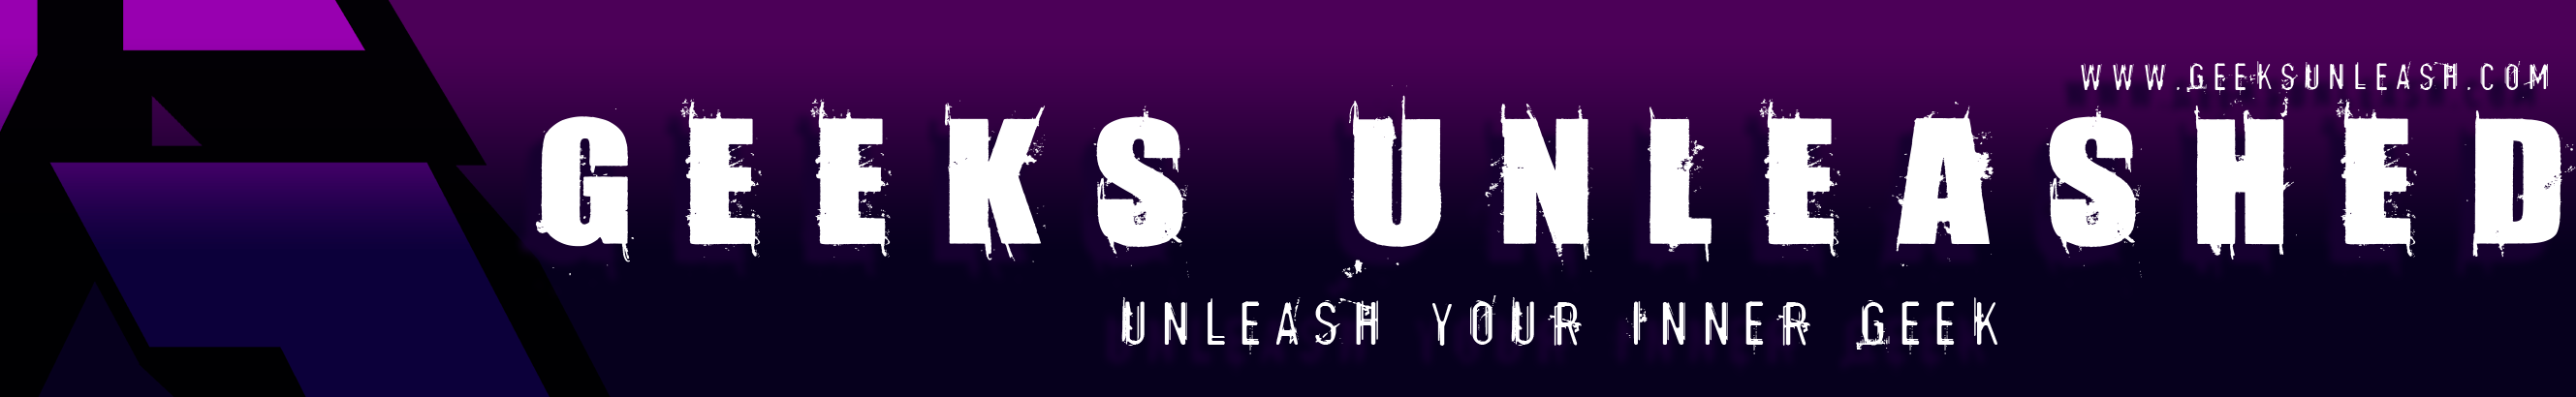 Geeks Unleashed's profile banner